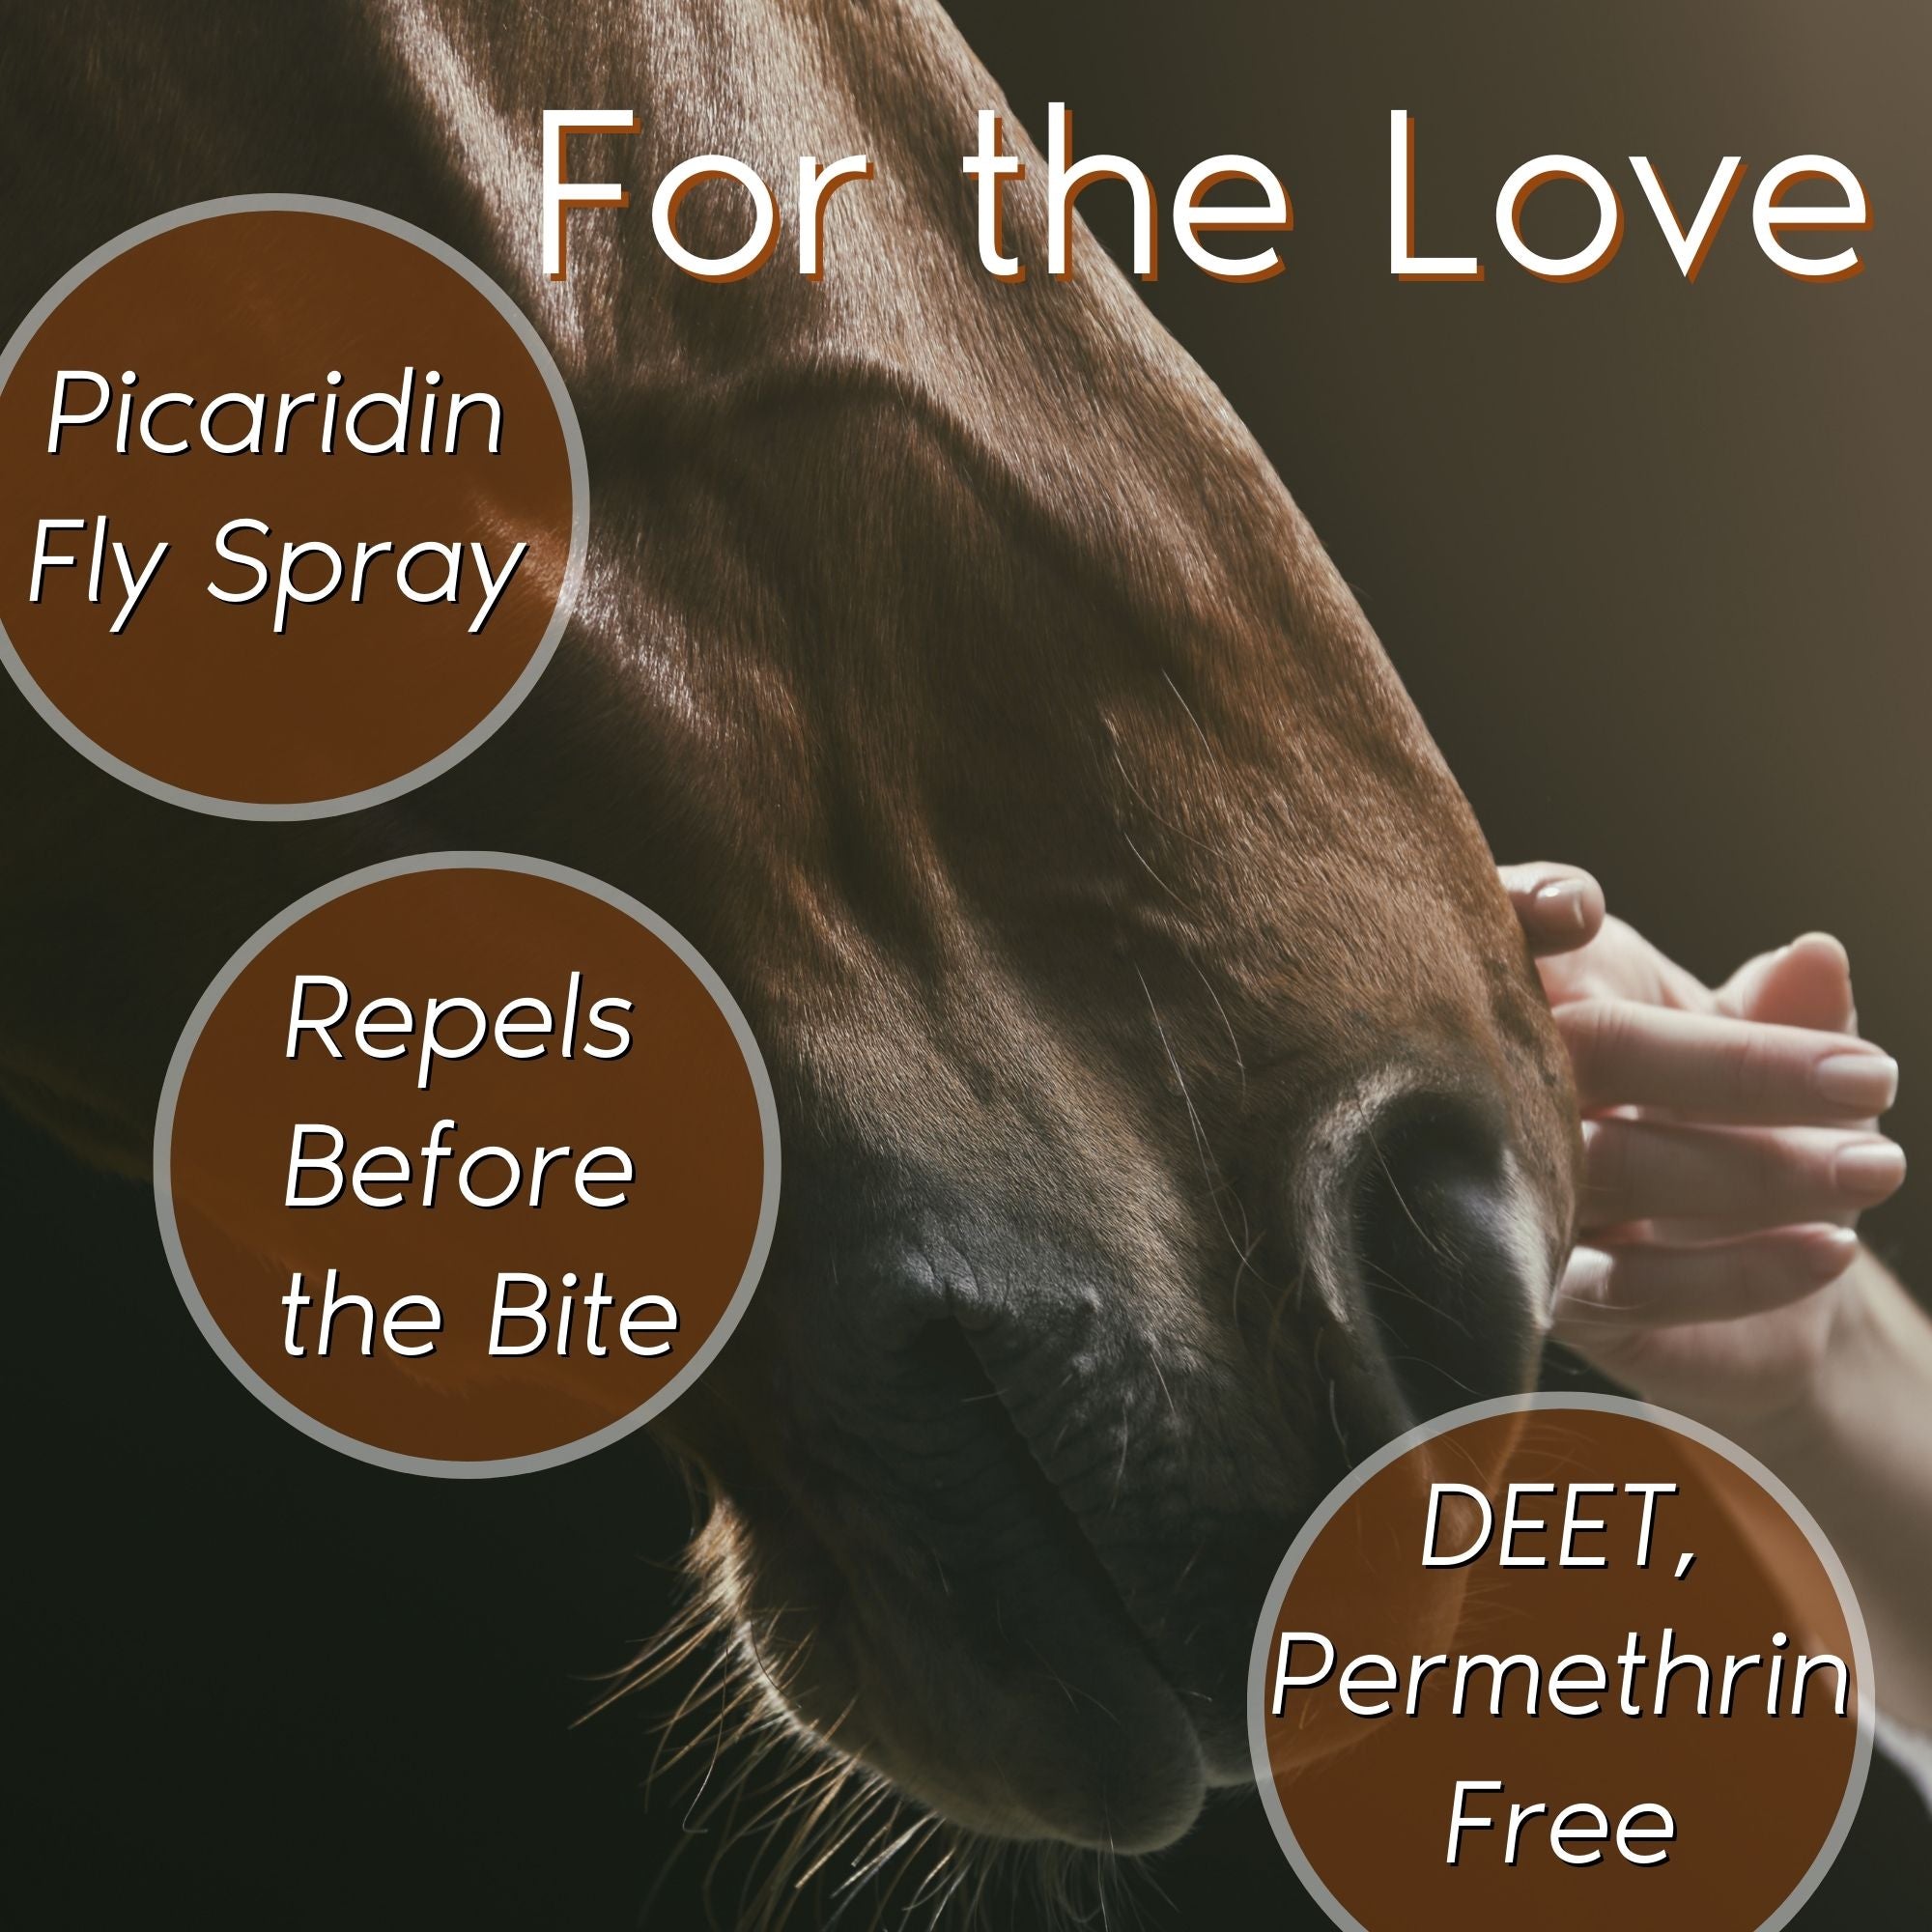 Horse & Rider Equine Fly/Insect Repellent Refill